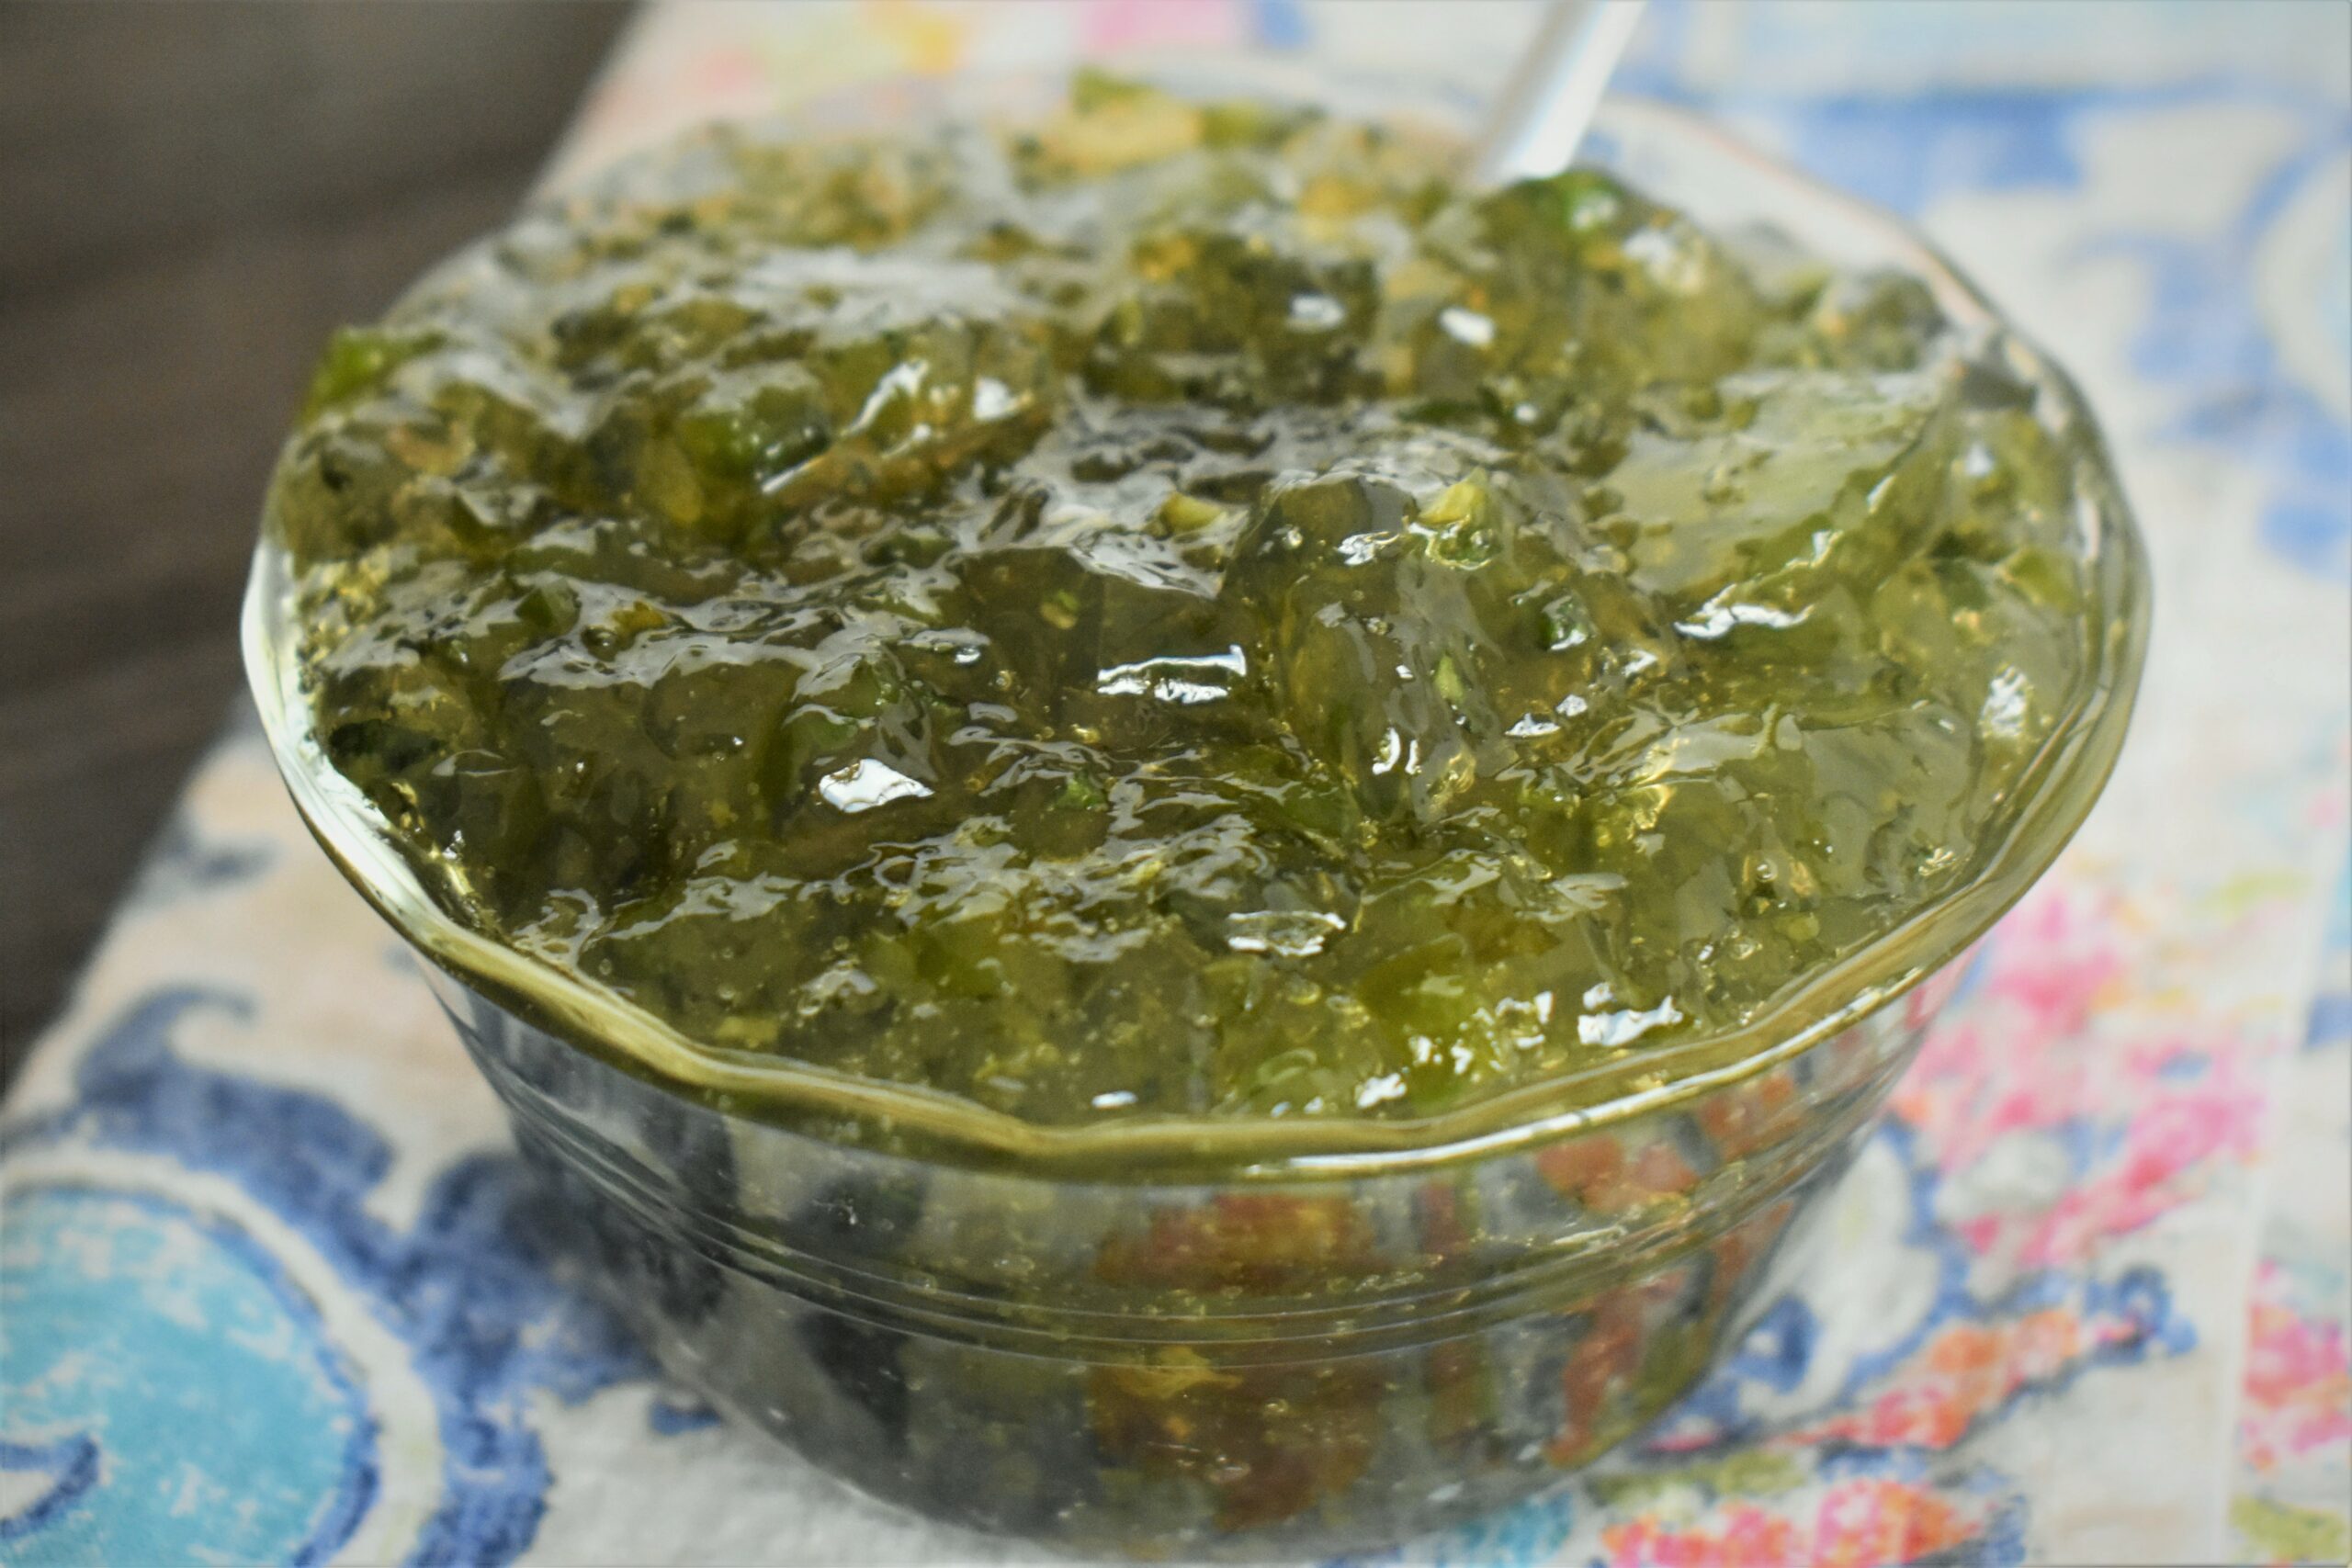 a close up of a cup of jalapeno mint jelly